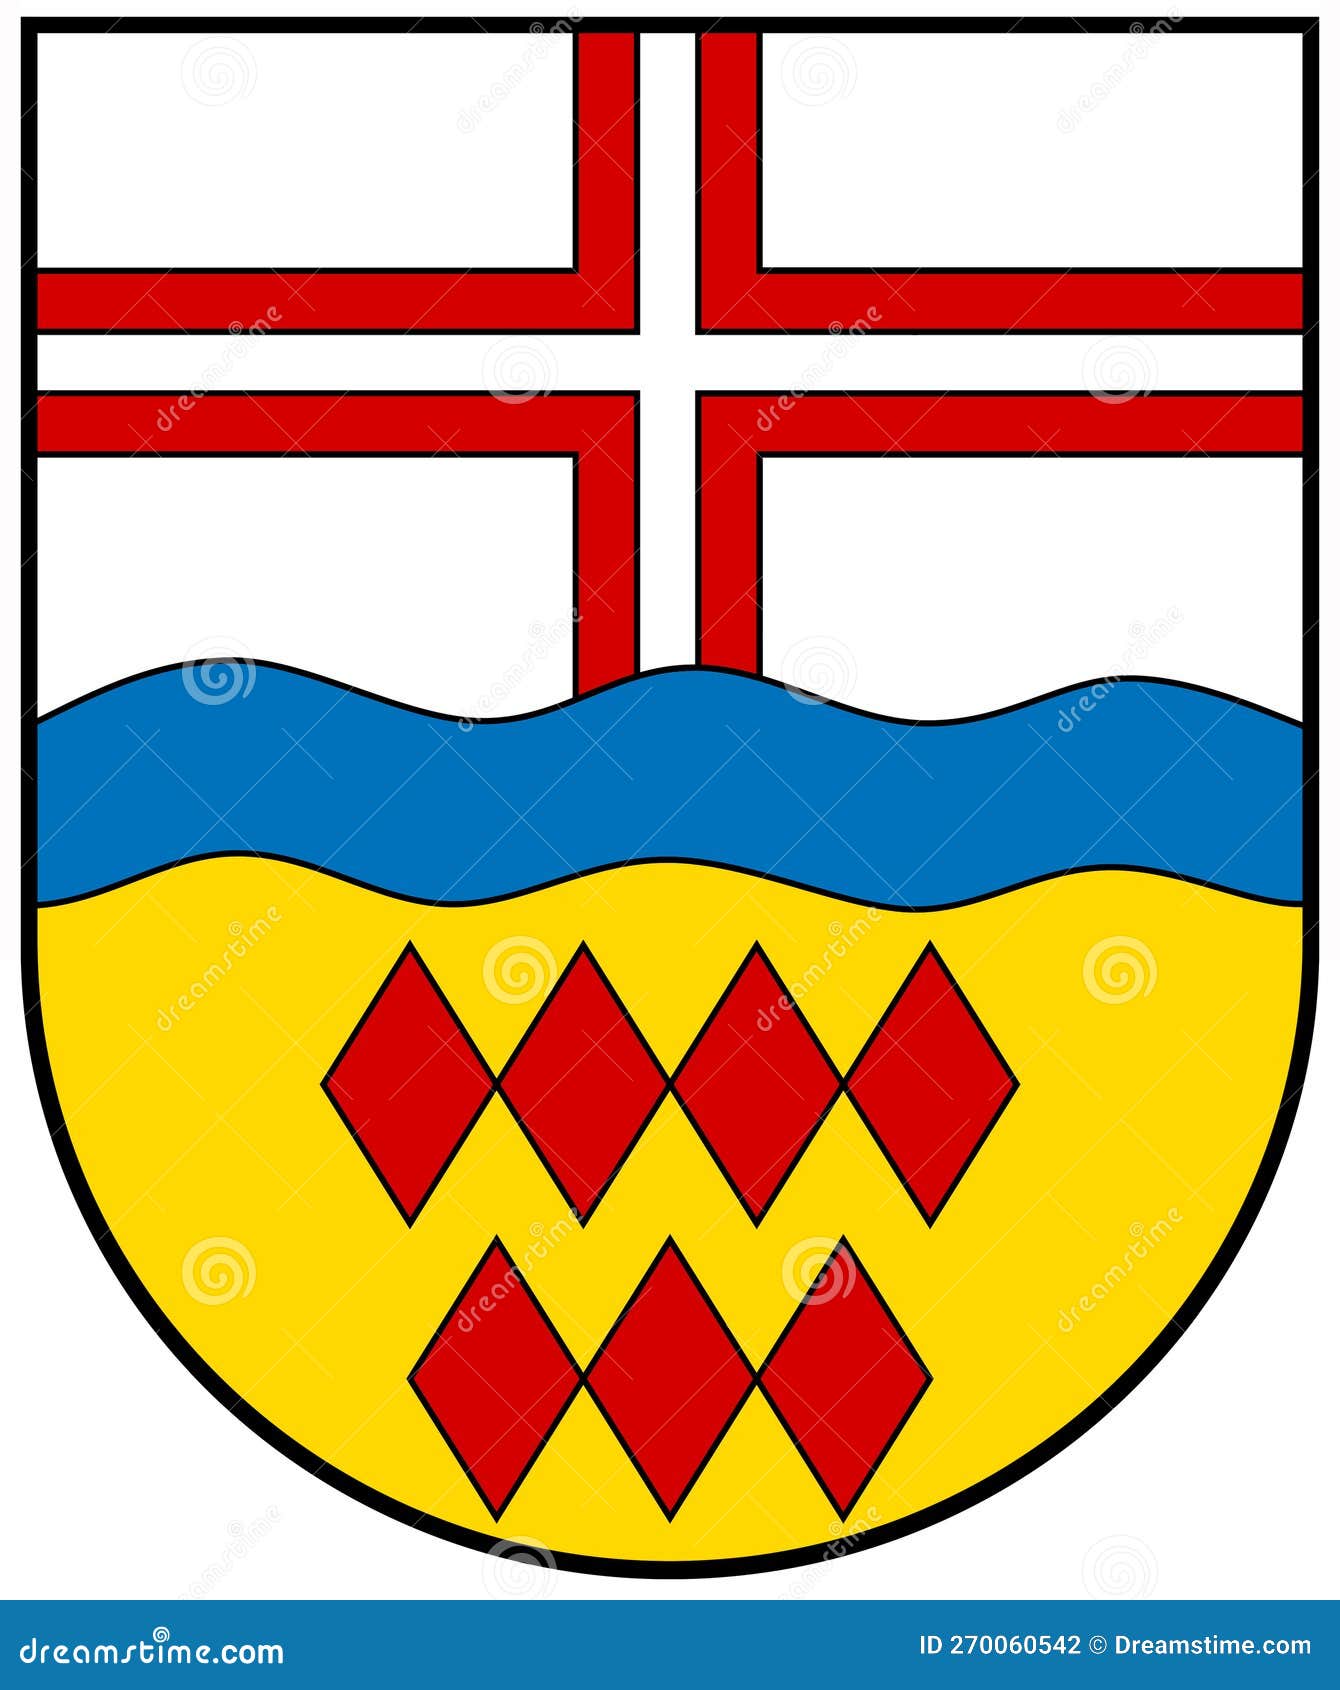 coat of arms of the commune of welling. germany.